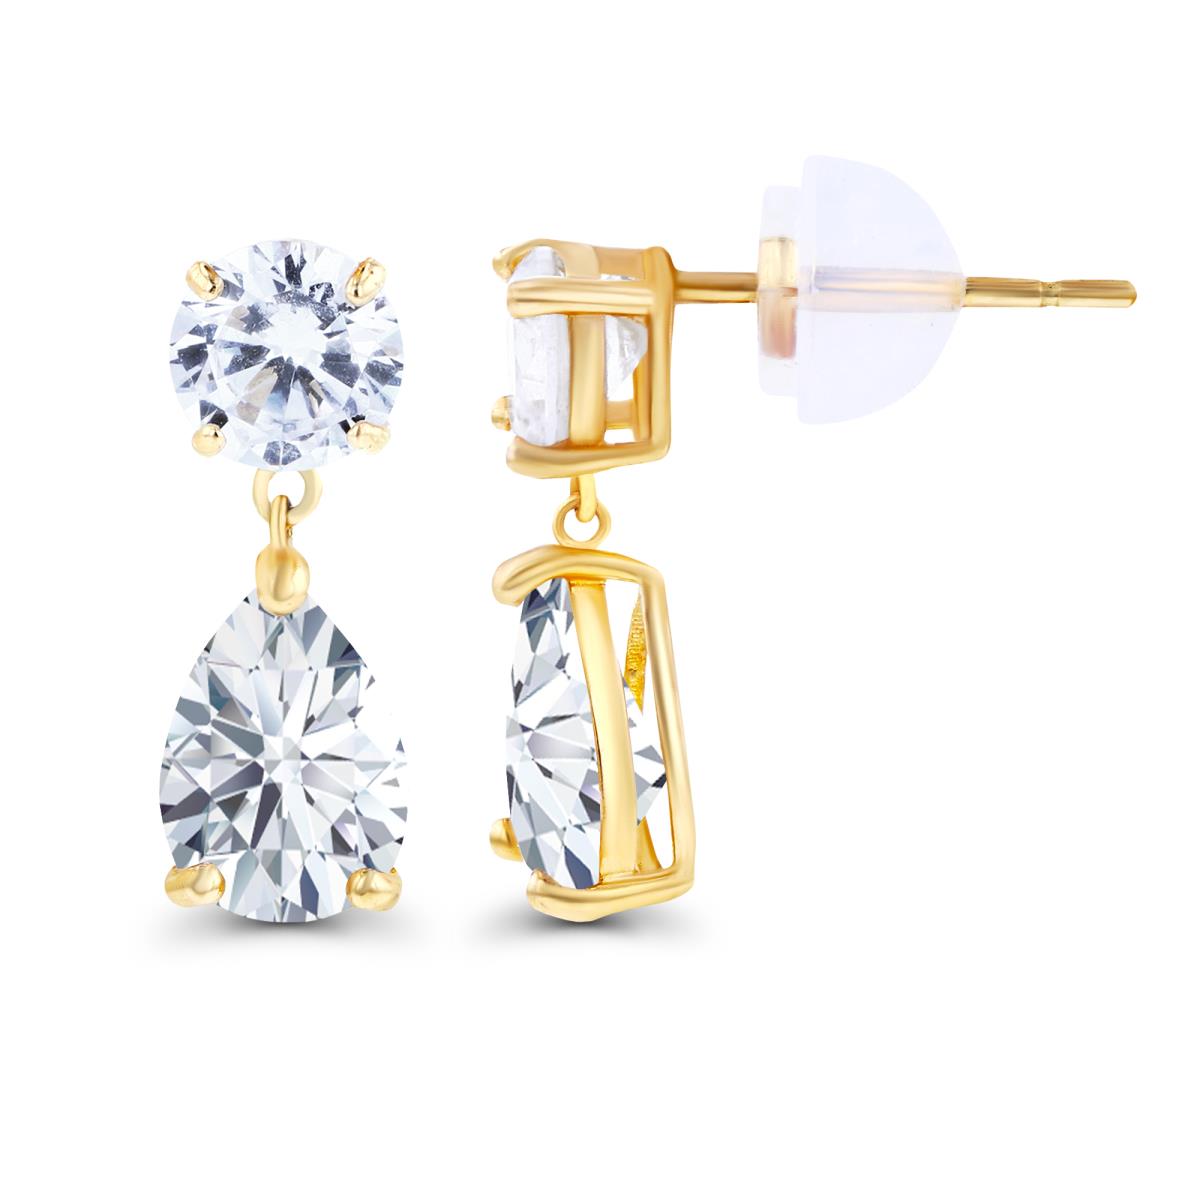 10K Yellow Gold 6x4mm Pear & 4.5mm Round Created White Sapphire Earrings with Silicon Backs